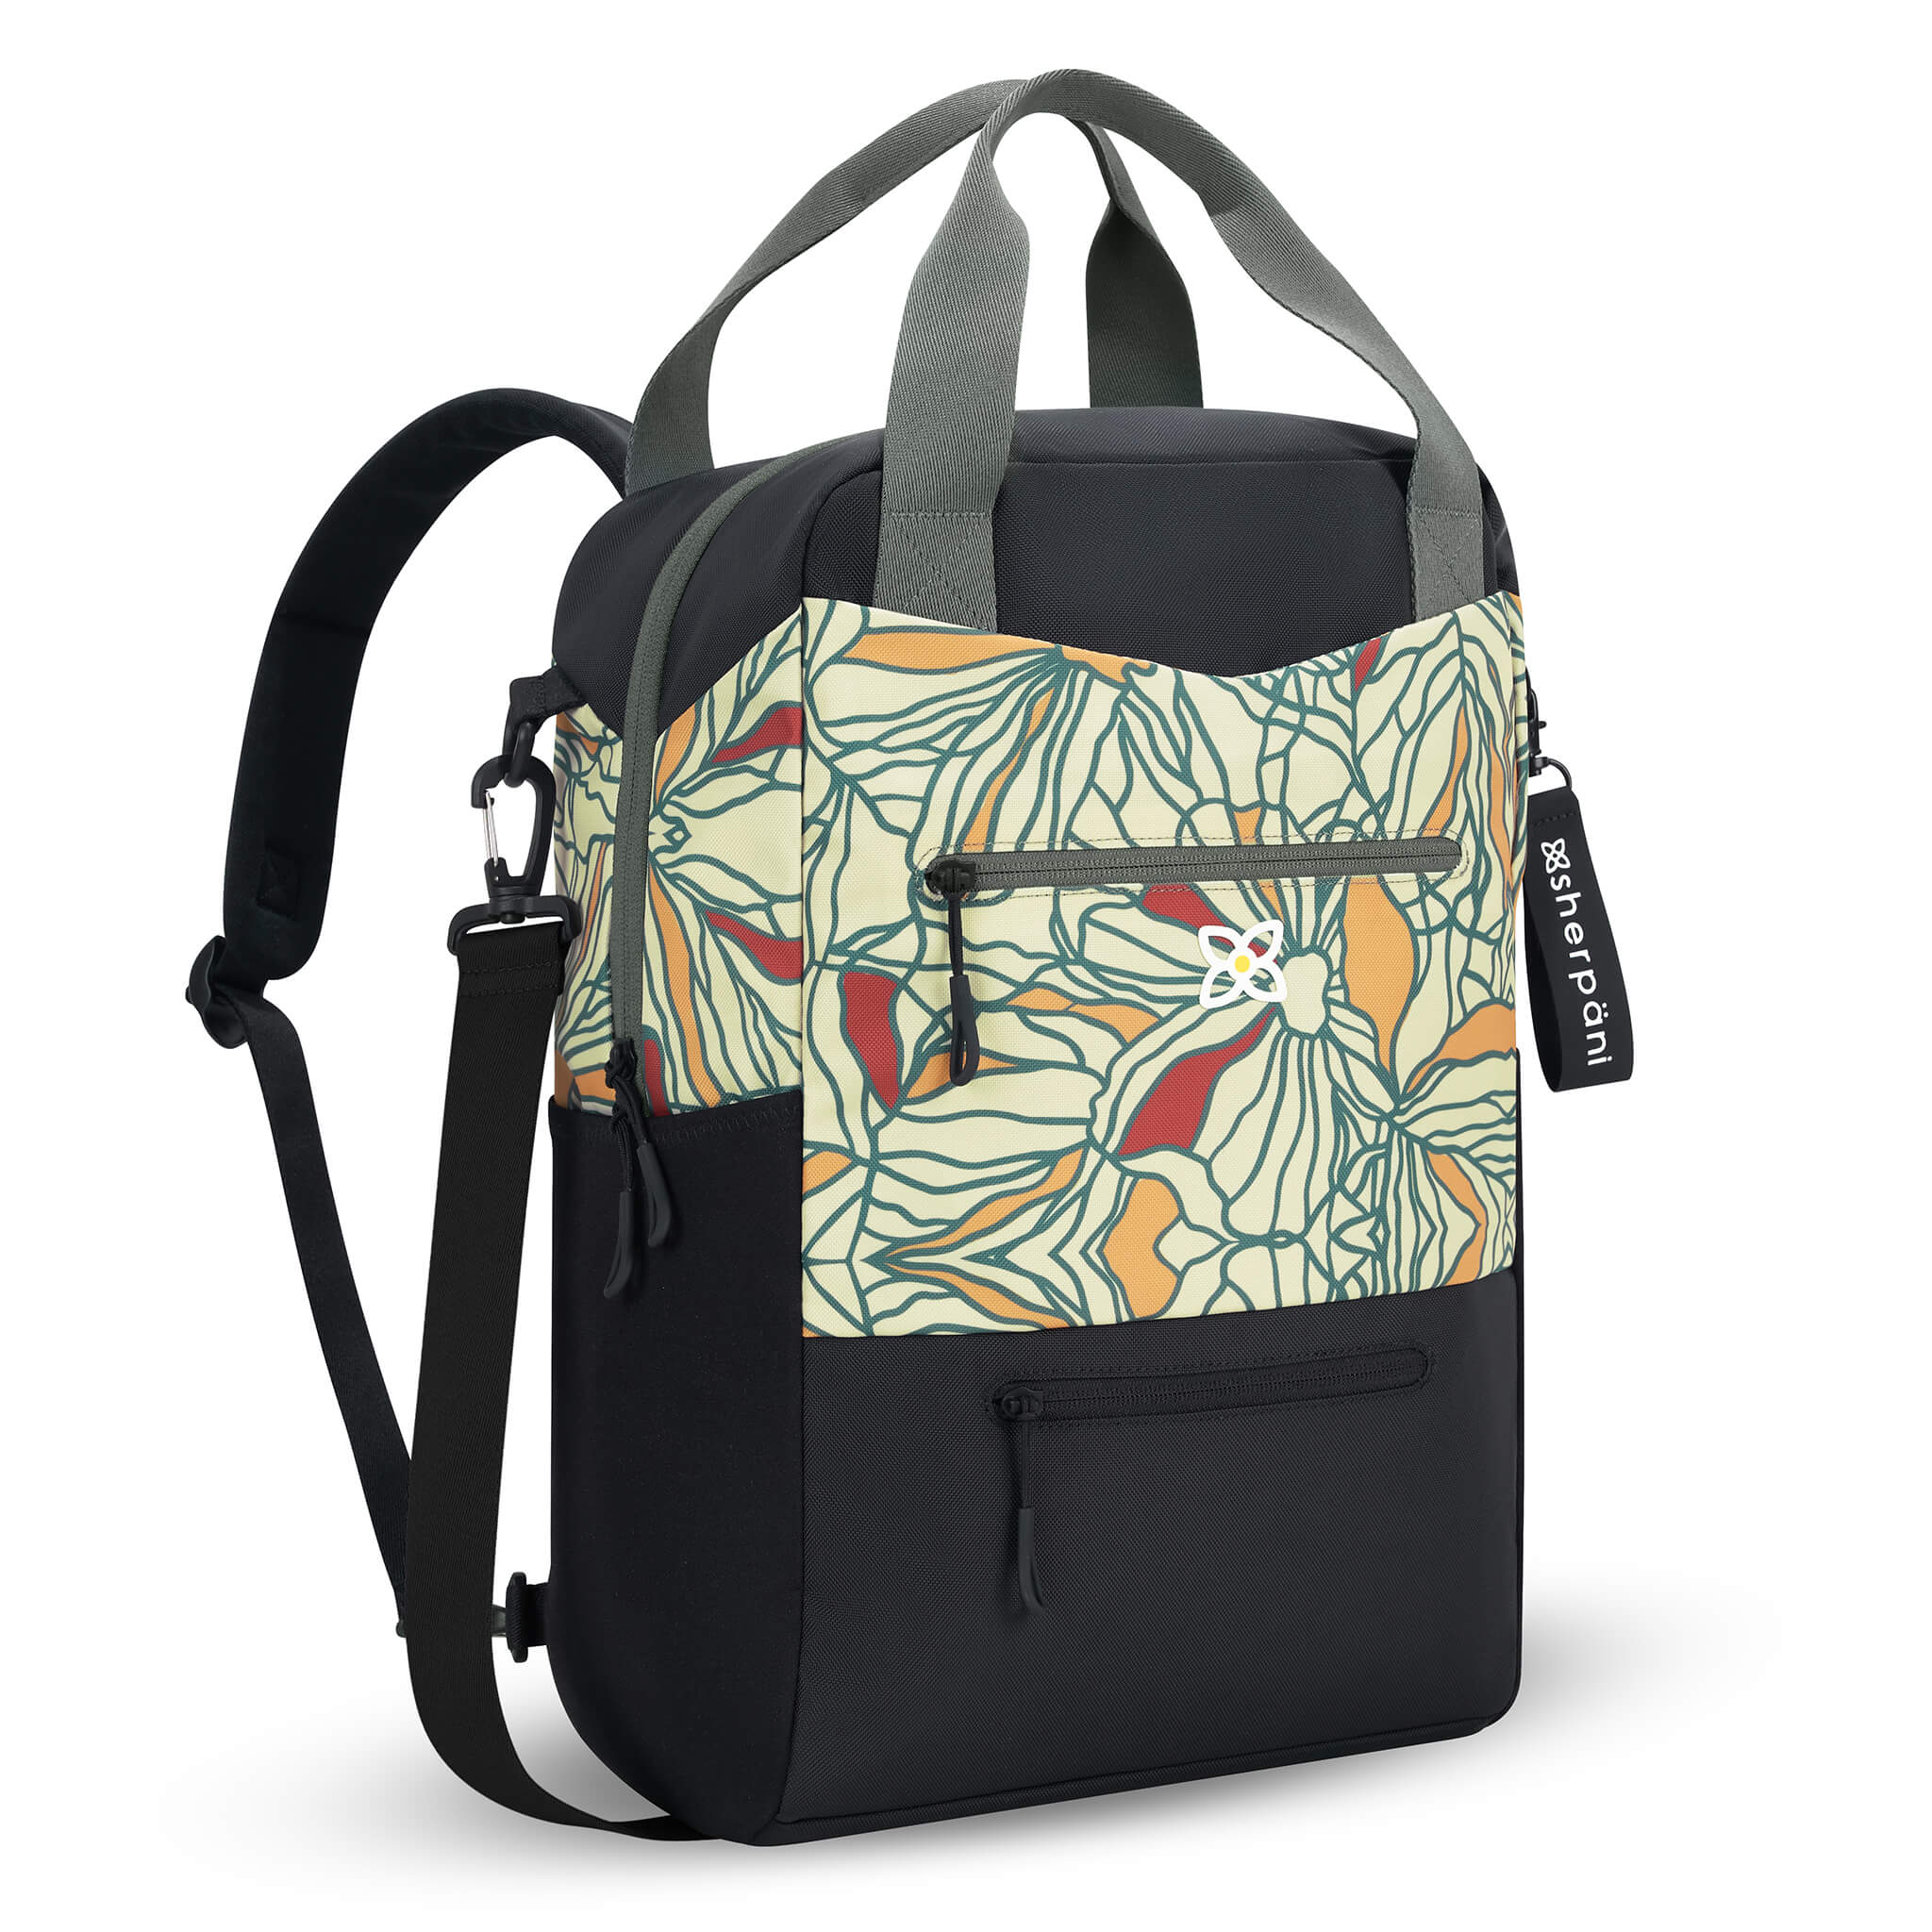 Angled front view of Sherpani convertible travel bag, the Camden in Fiori. Camden features include adjustable backpack straps, adjustable crossbody strap, tote bag handles, upper zipper pocket, lower zipper pocket, padded laptop sleeve, three water bottle holders and luggage pass through feature. The Fiori colorway is two-toned in black and a floral pattern in neutral colors with red accents. #color_fiori